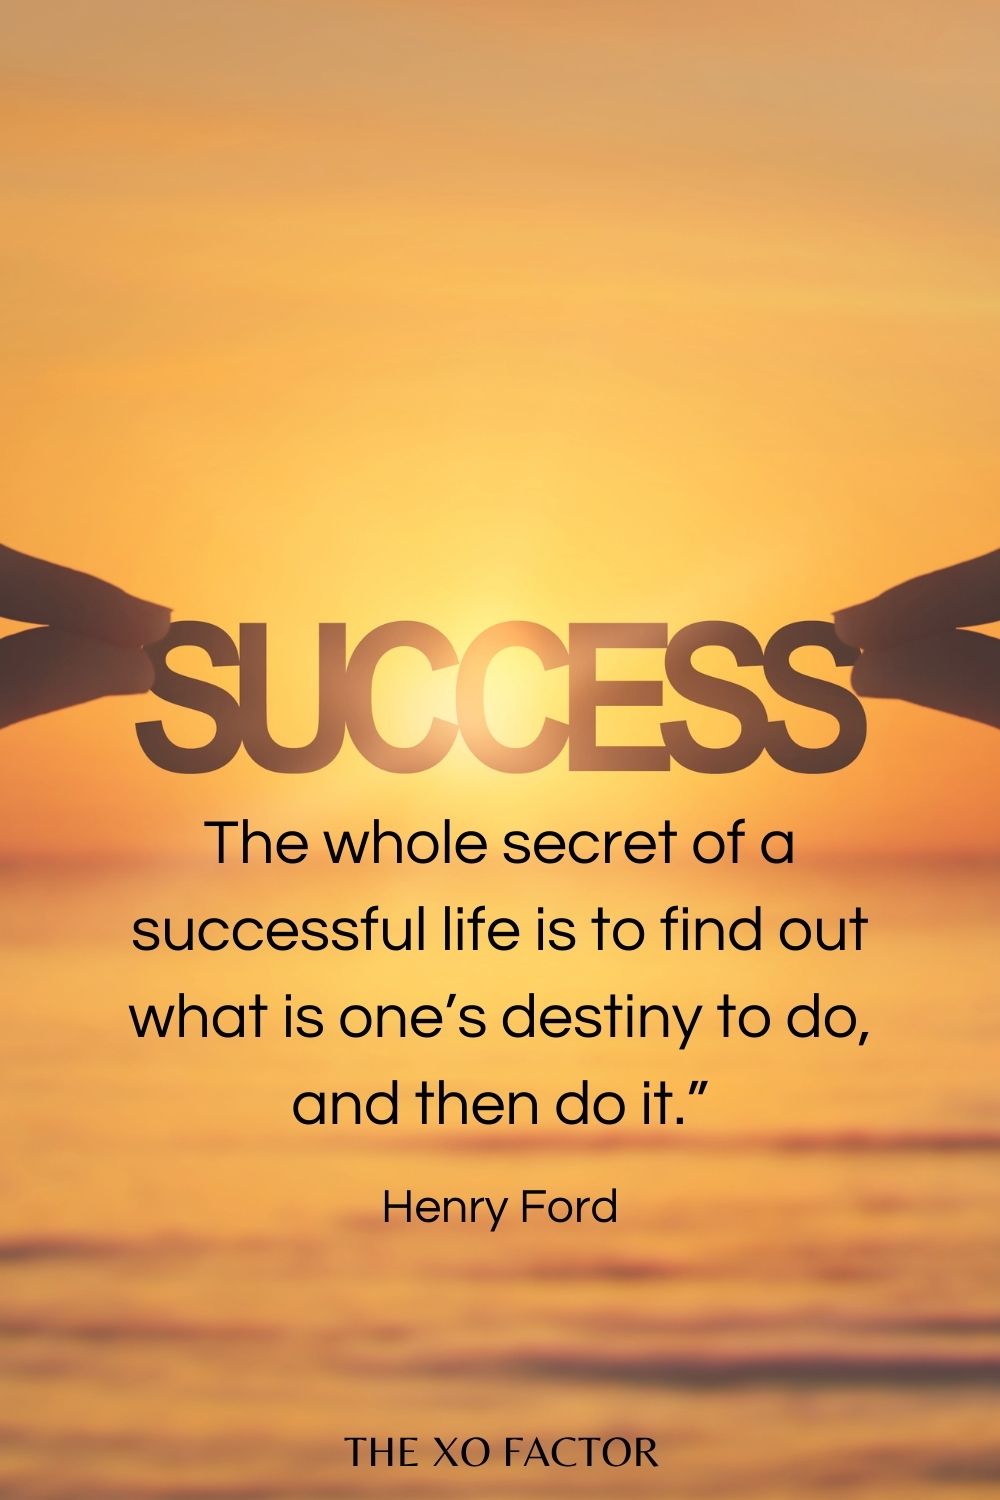 The whole secret of a successful life is to find out what is one’s destiny to do, and then do it.” Henry Ford